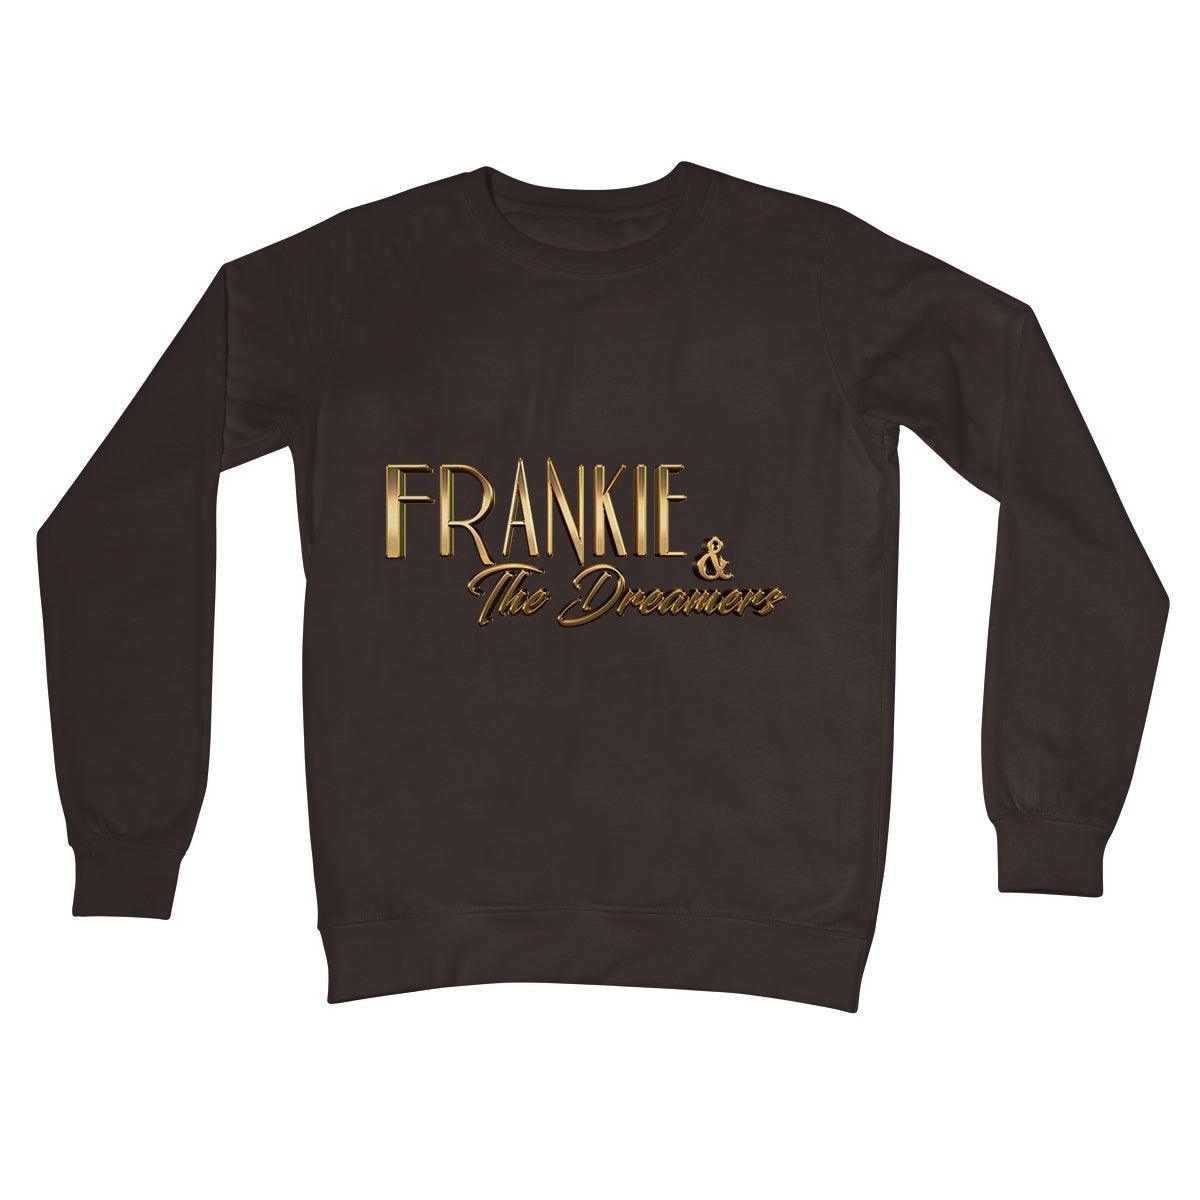 Frankie And The Dreamers Crew Neck Sweatshirt | Apparel Hot Chocolate